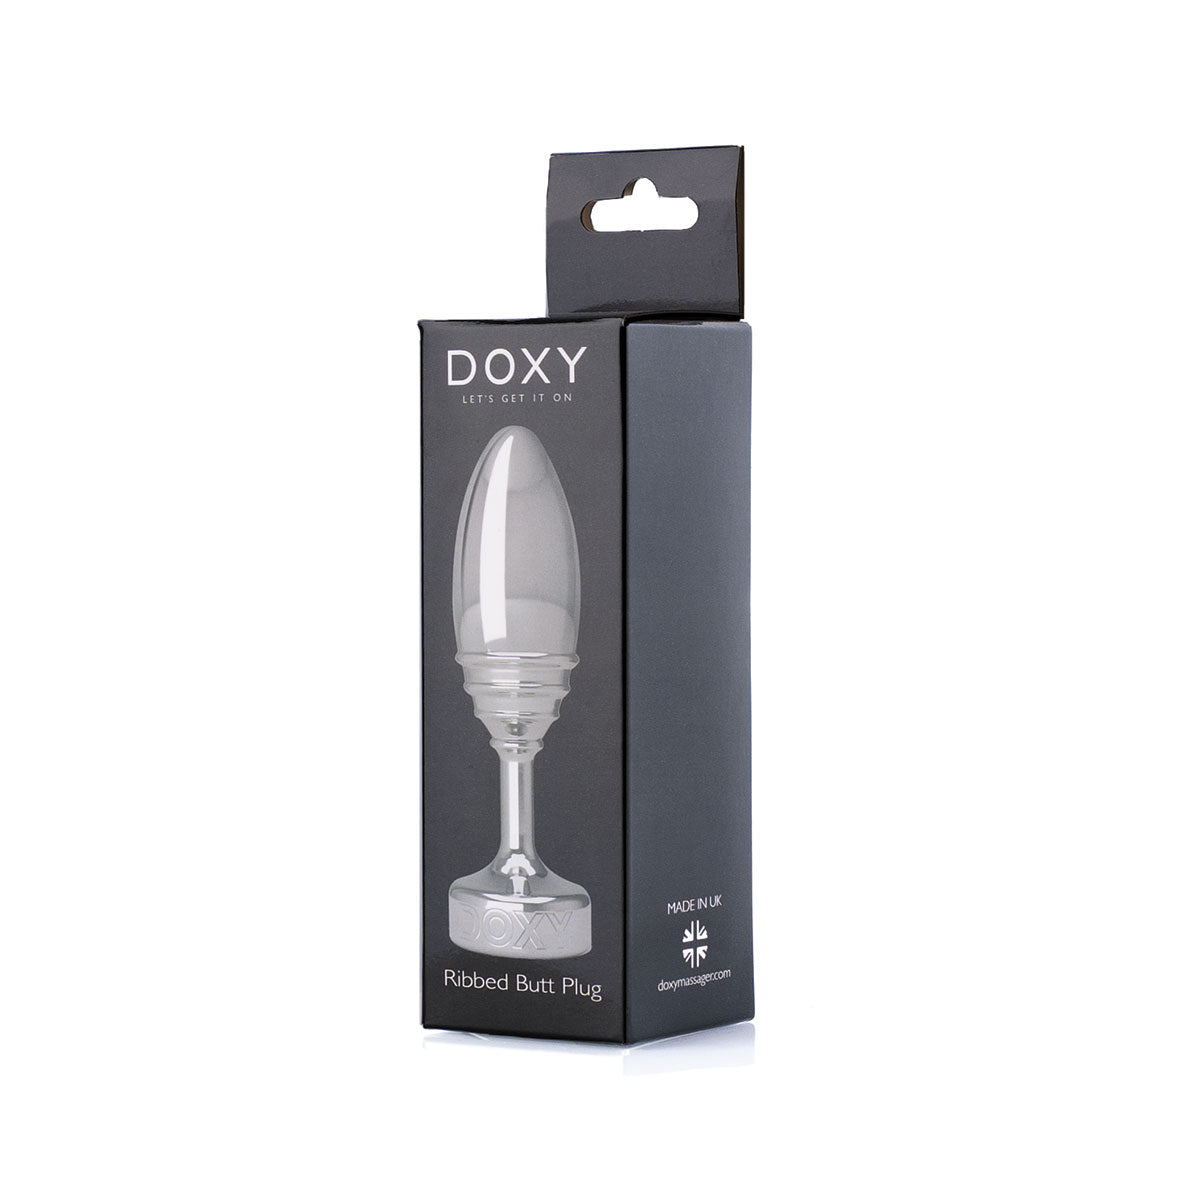 Doxy Ribbed Plug Intimates Adult Boutique